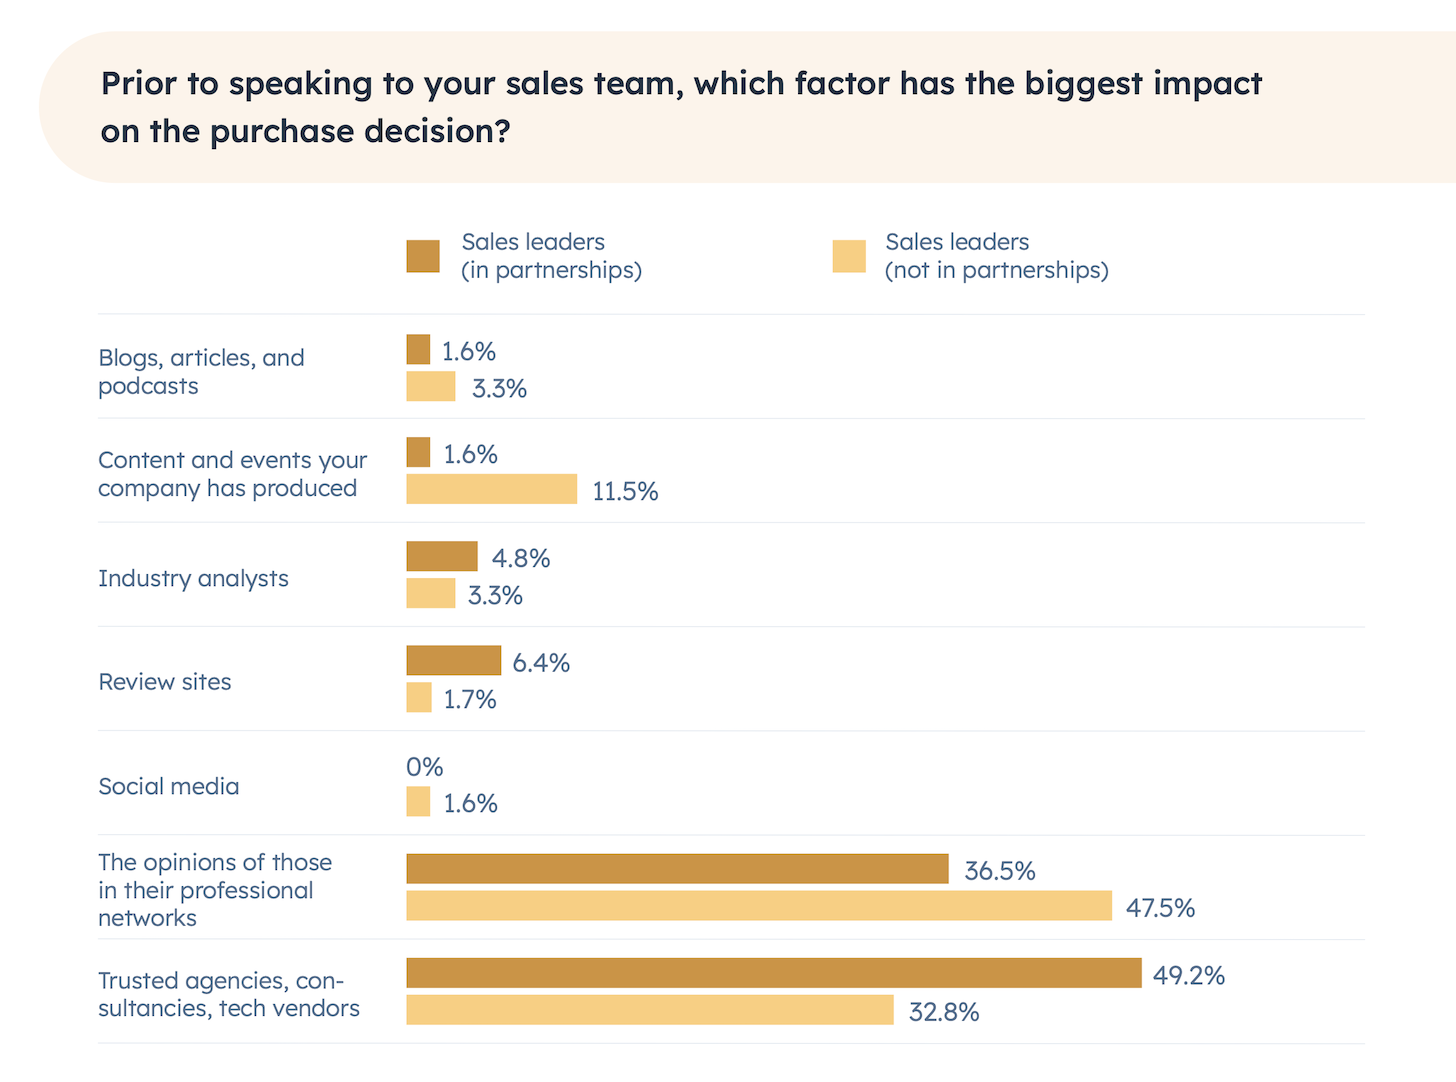 Factors Impacting Purchase Decision Before Talking to Sales